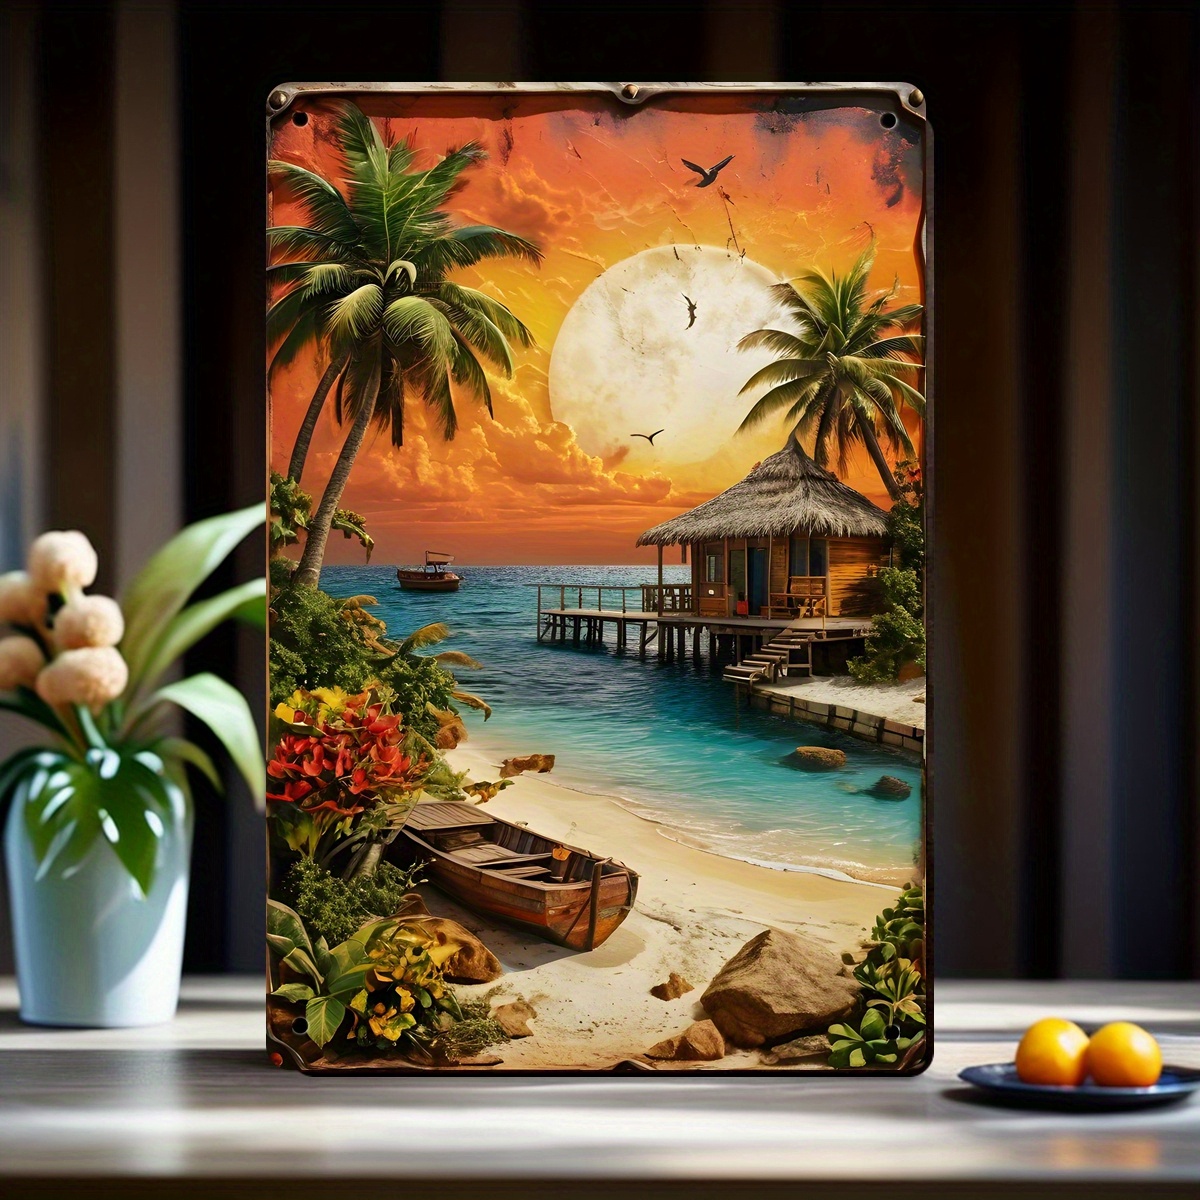 

Vintage Beach Sunset Metal Tin Sign (8x12 Inches) - 3d Visual Effect, Perfect For Home, Cafe, For Man Cave, Bar, Office & Party Decor